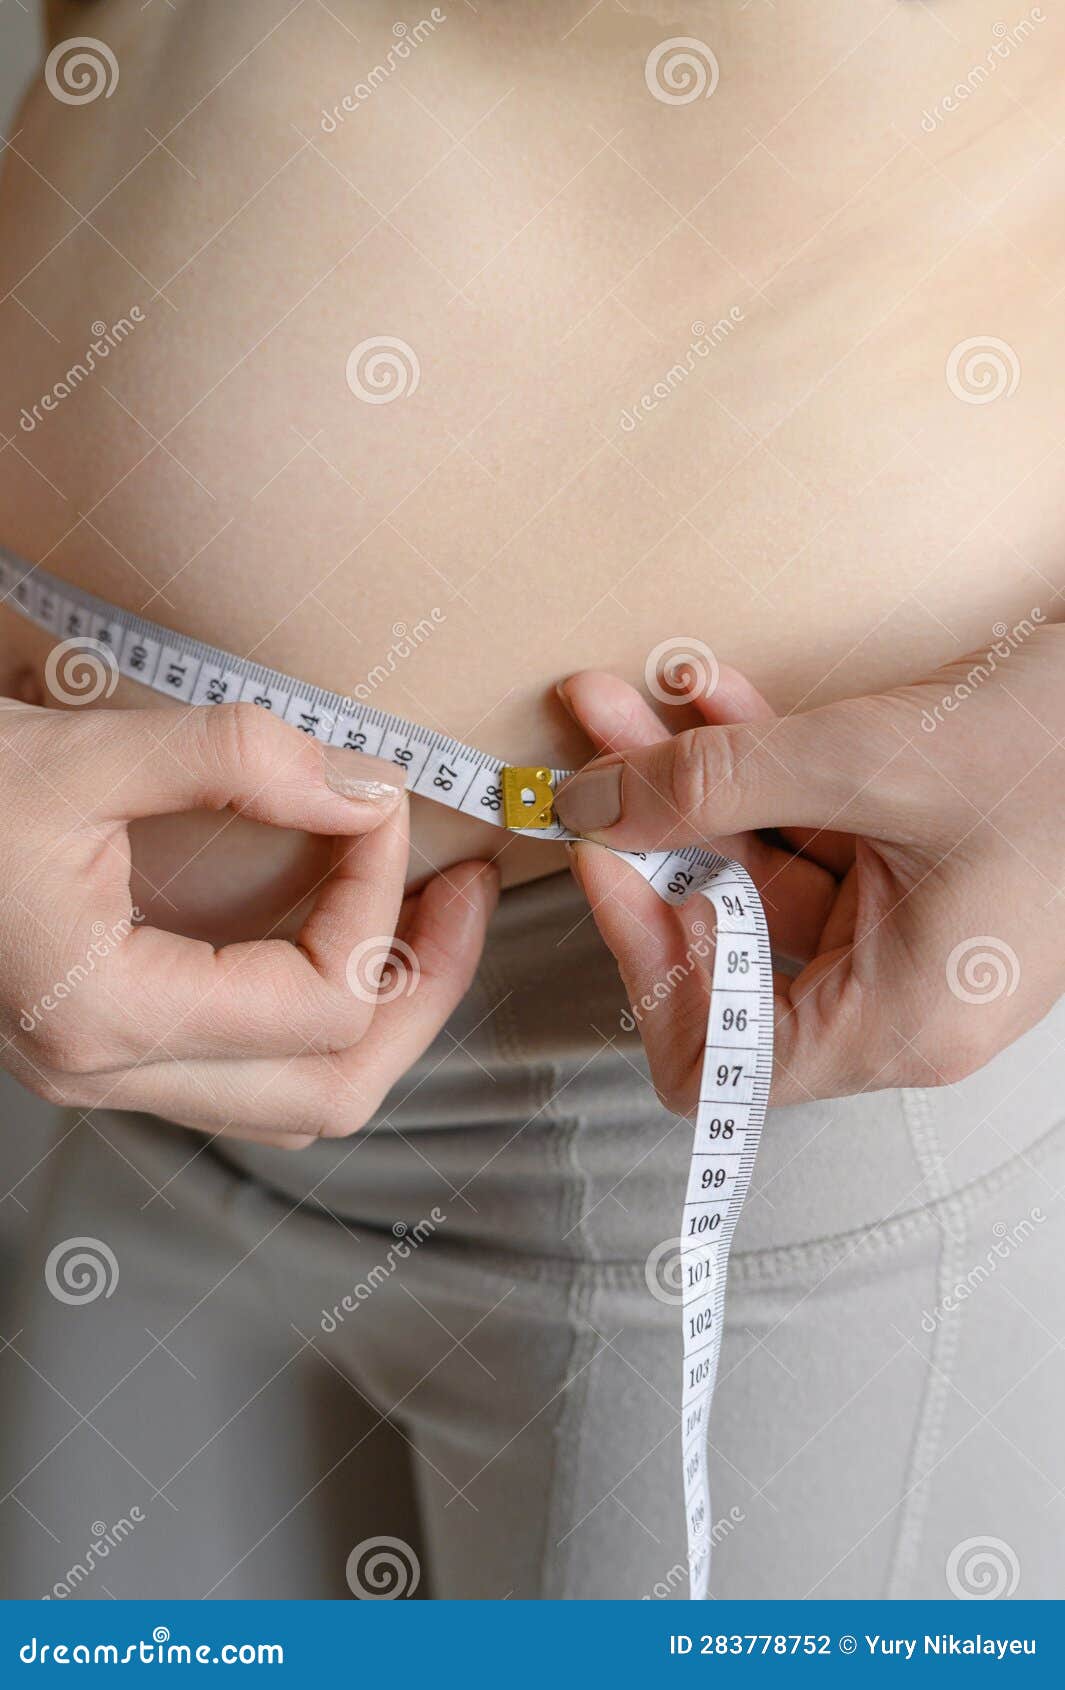 A Fat Woman Measures Her Waist with a Measuring Tape, Close-up